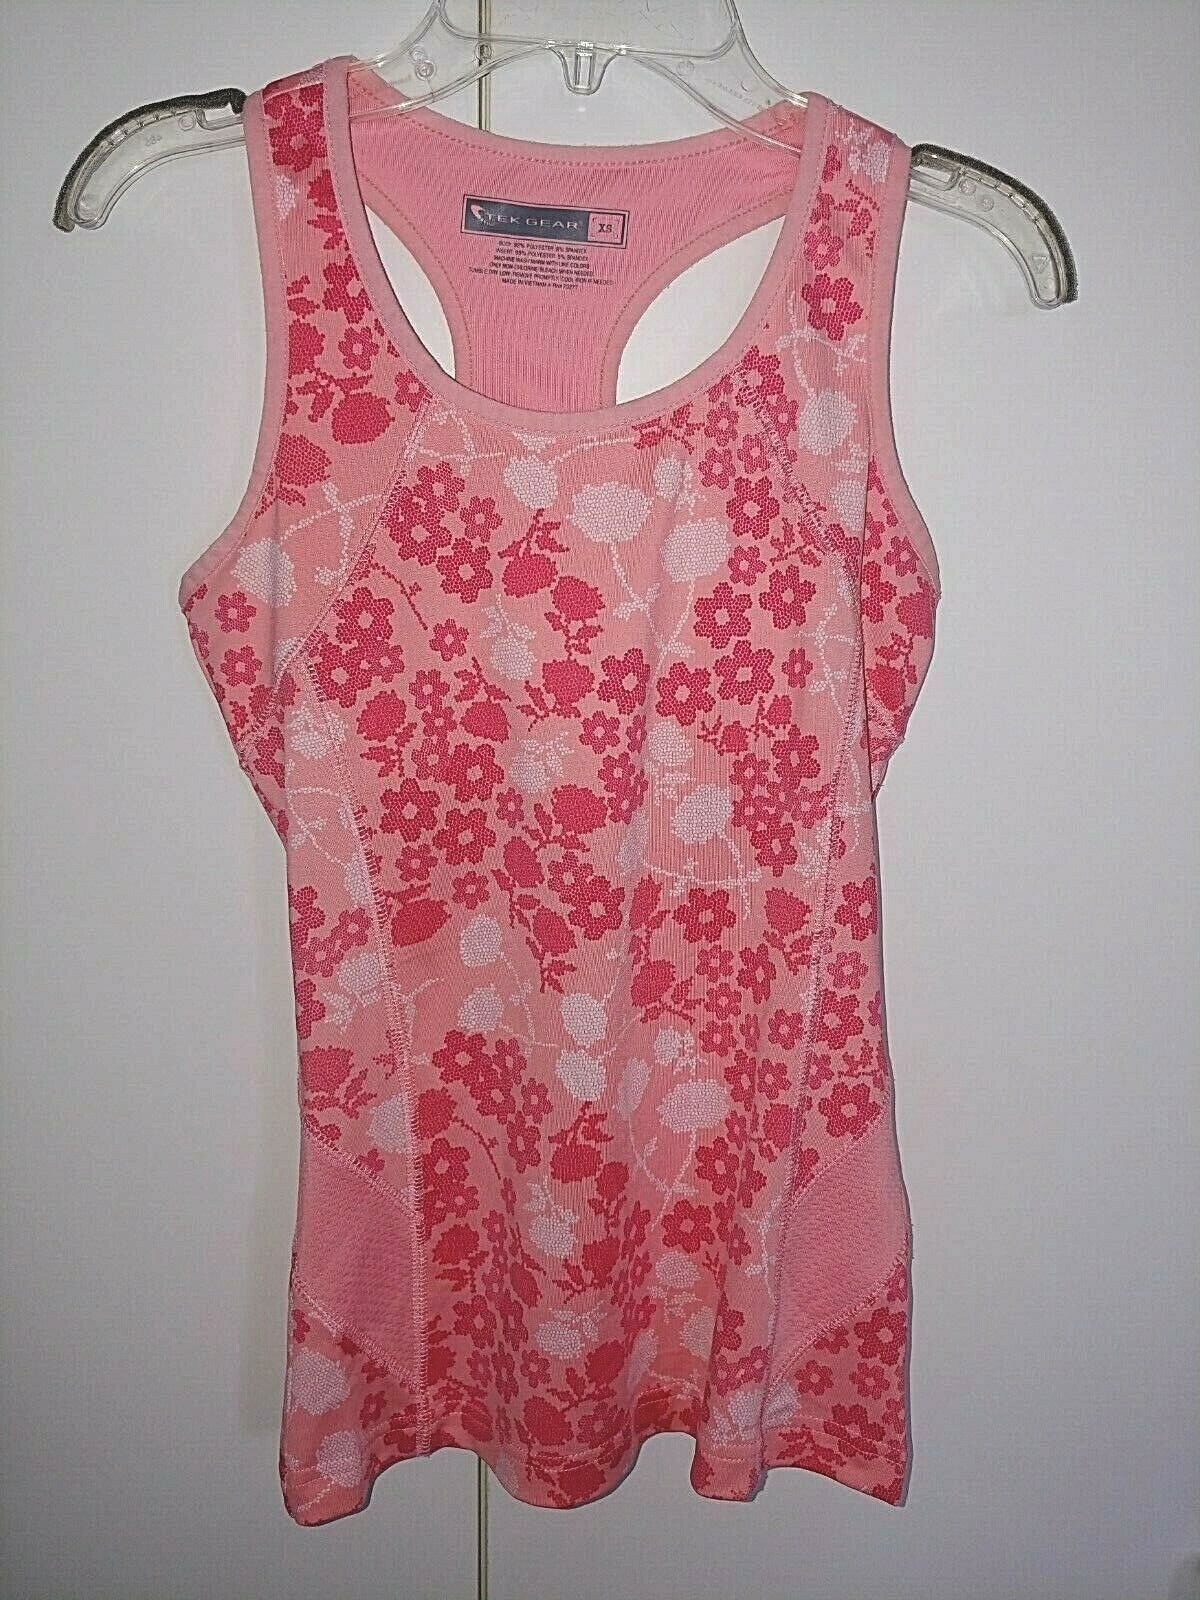 Primary image for TEK GEAR LADIES SLEEVELESS ATHLETIC TOP-XS-BARELY WORN-POLYESTER/SPANDEX-NICE